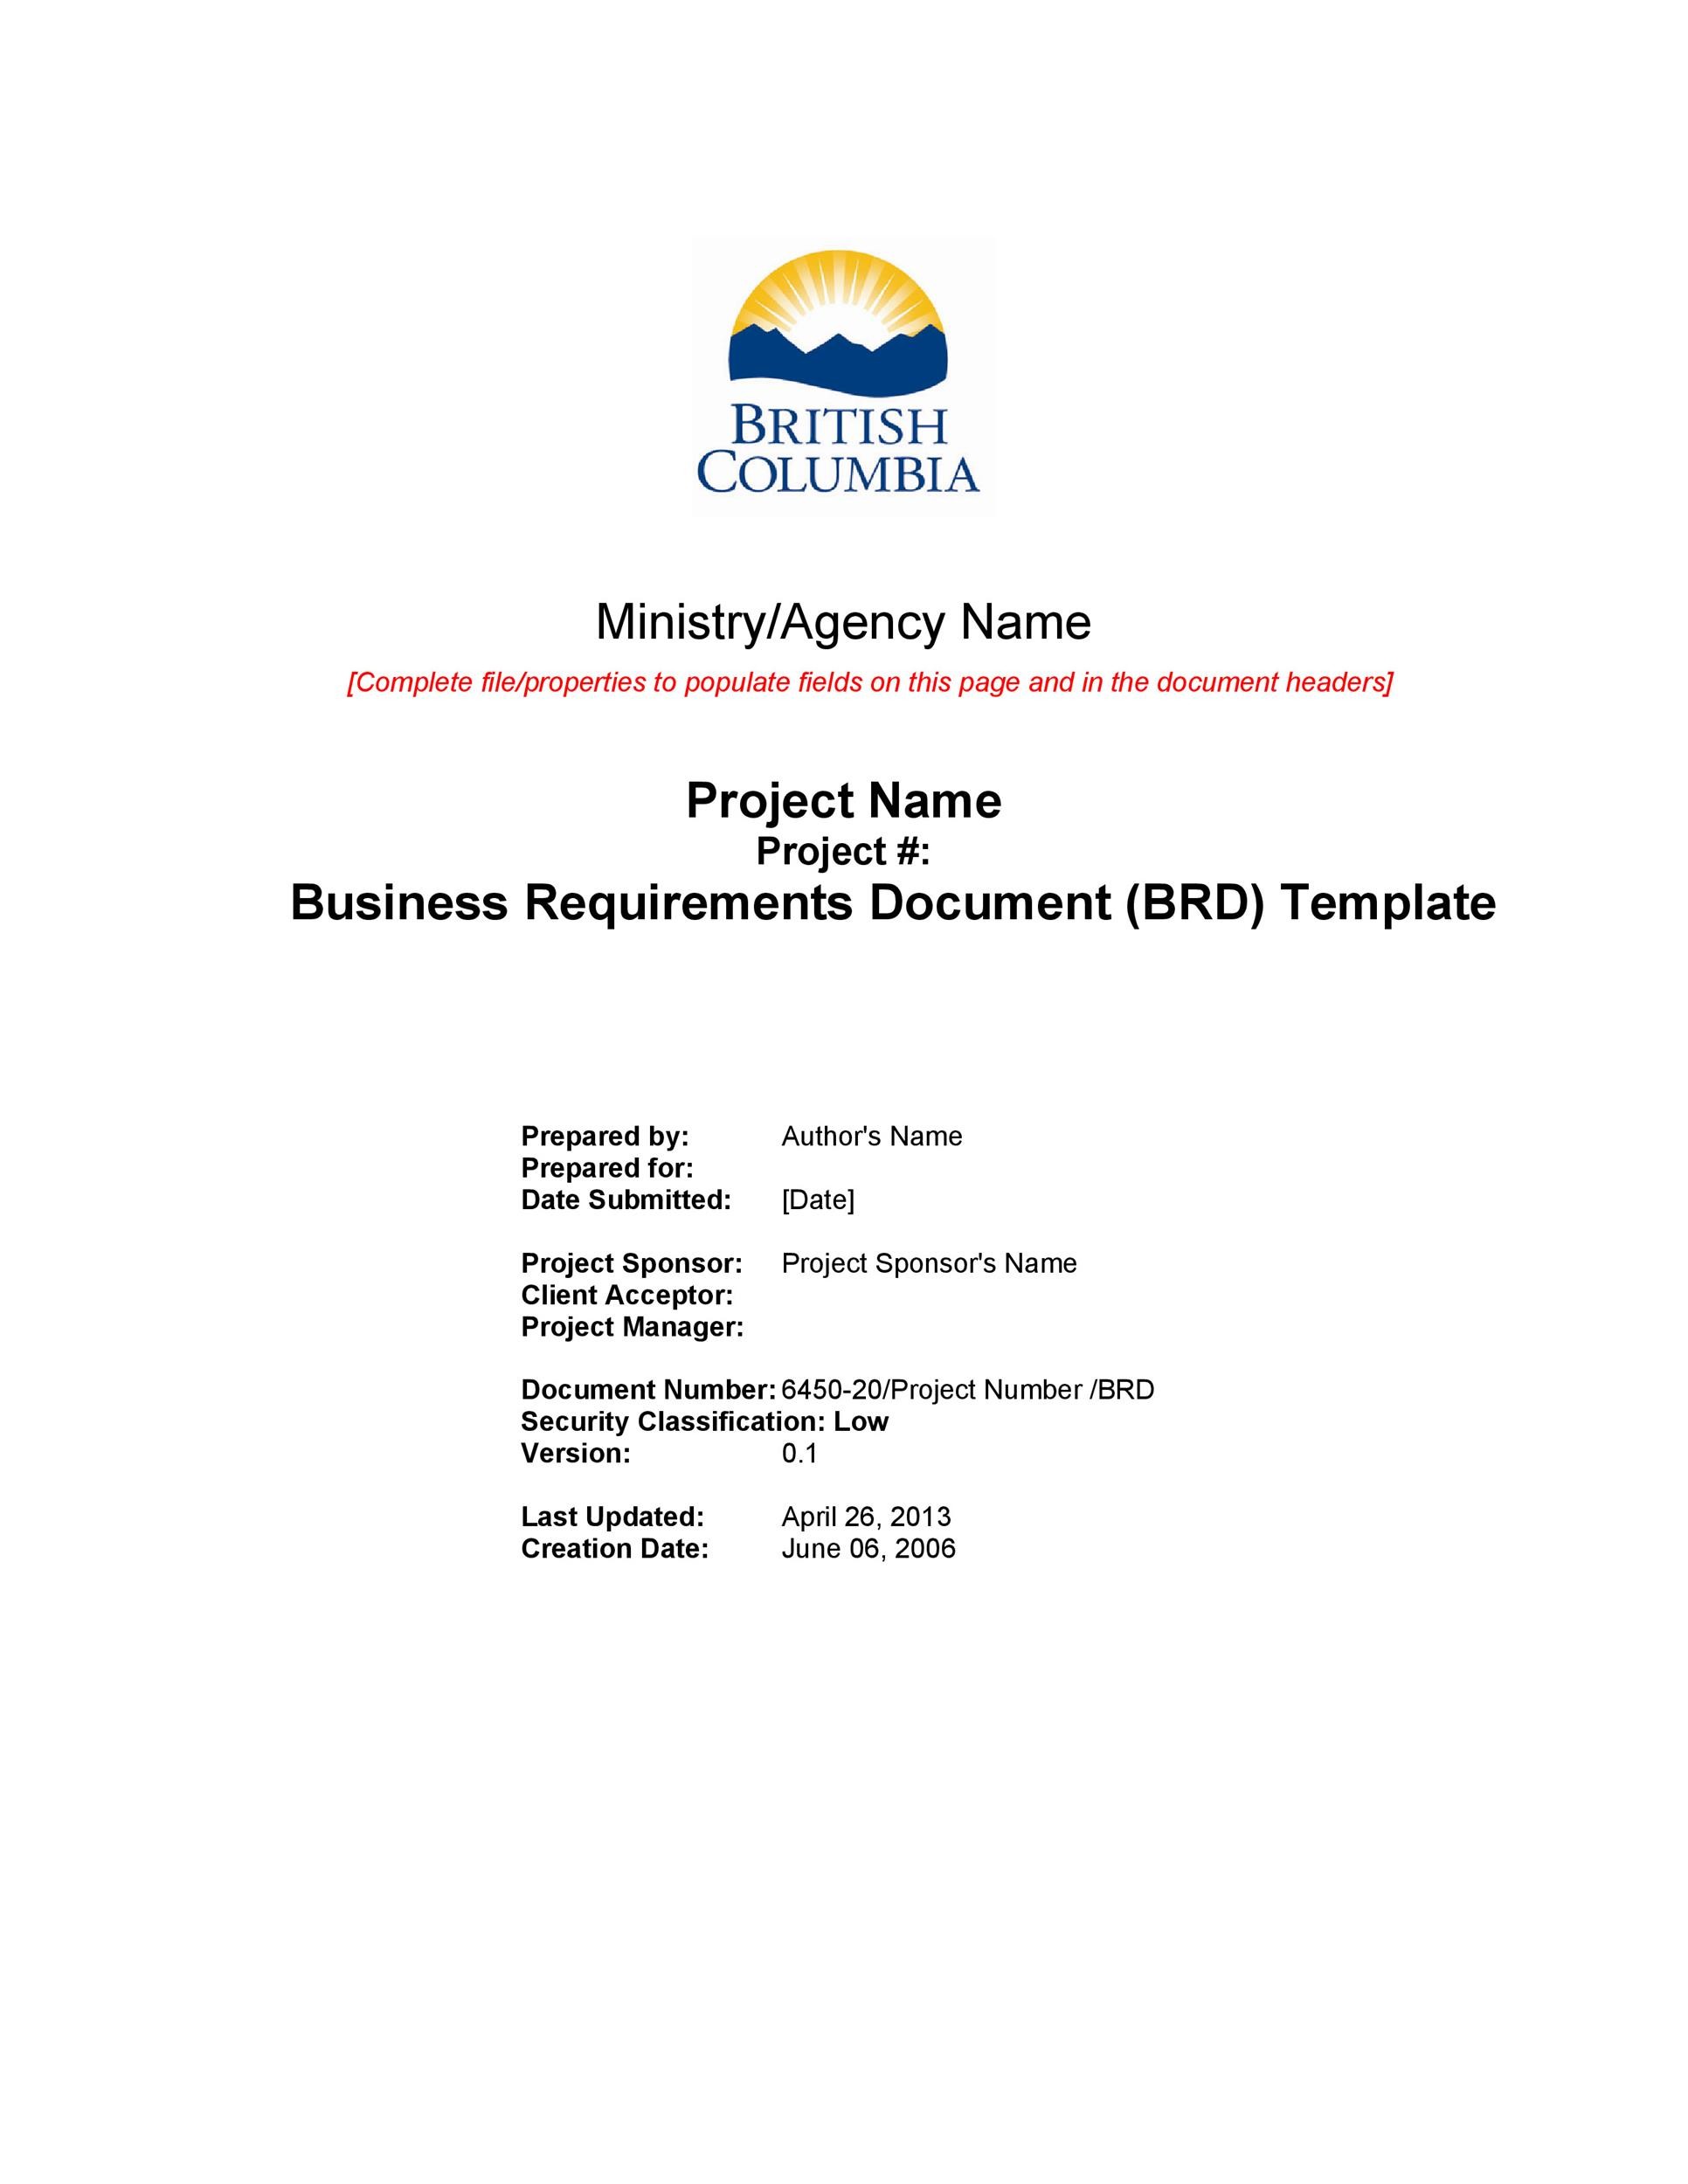 business-requirements-document-template-02.jpg